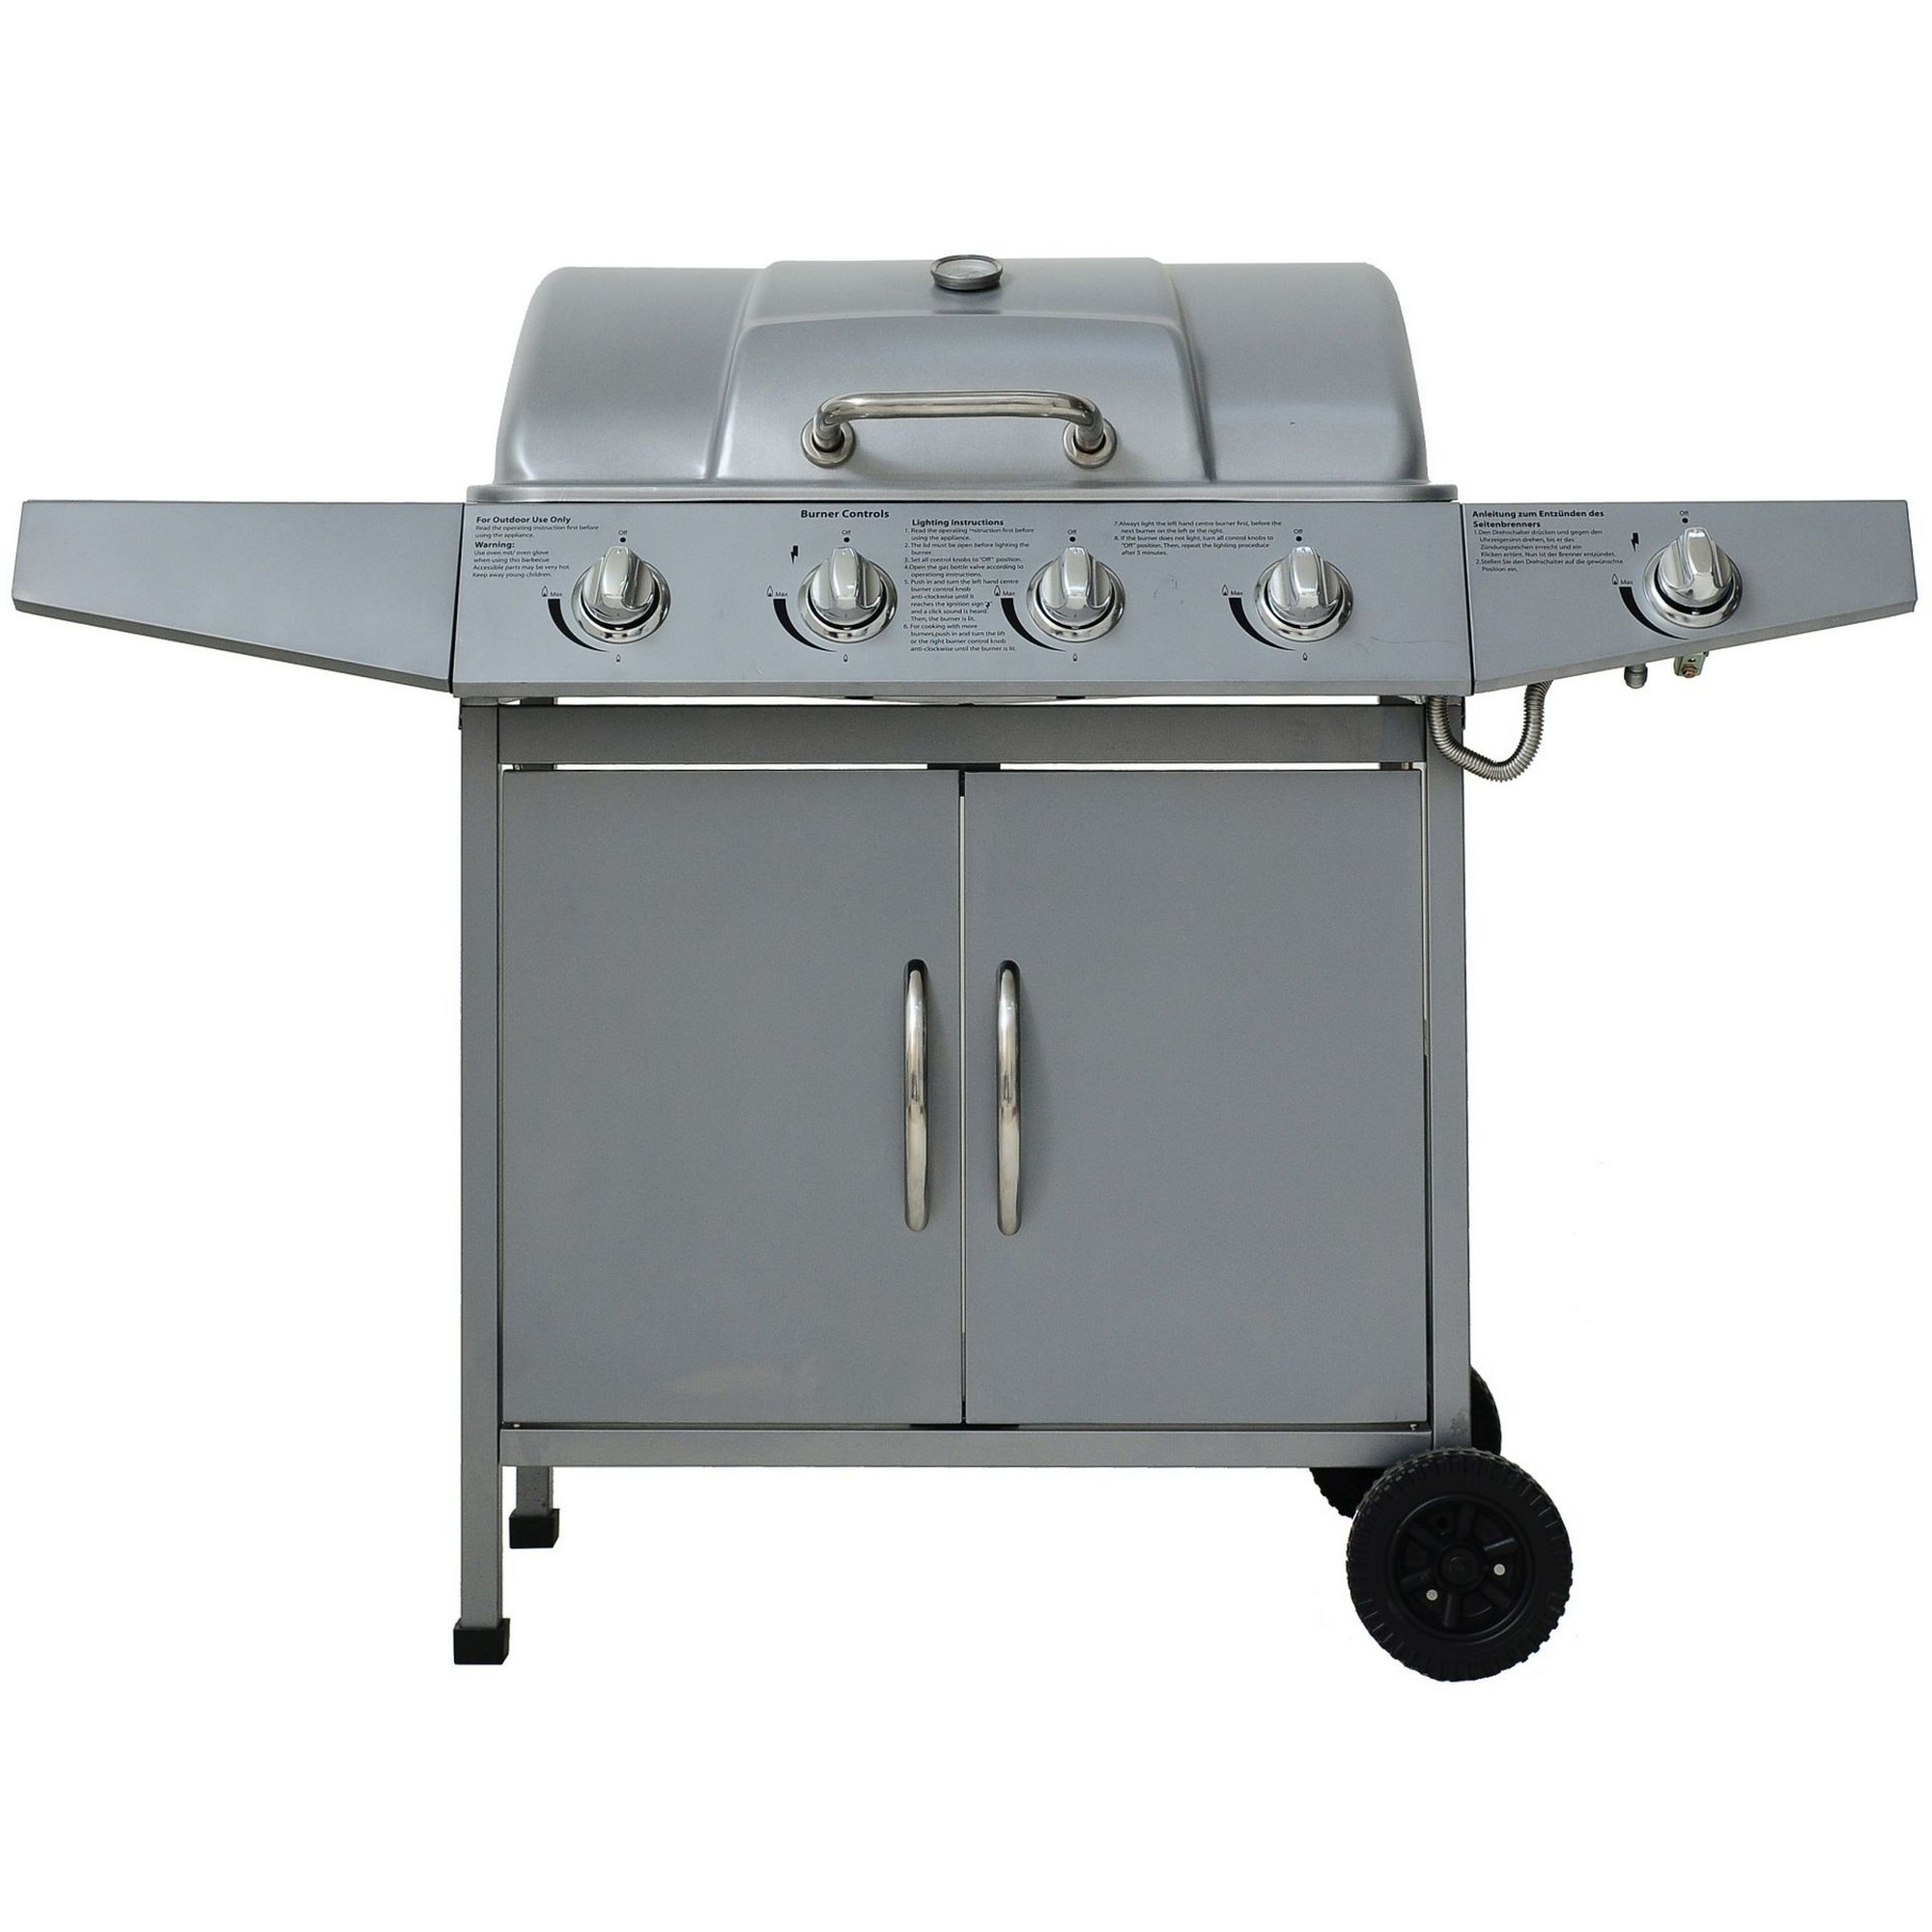 Gasgrill 'Dayton' silber 97 x 127,5 x 53 cm + product picture